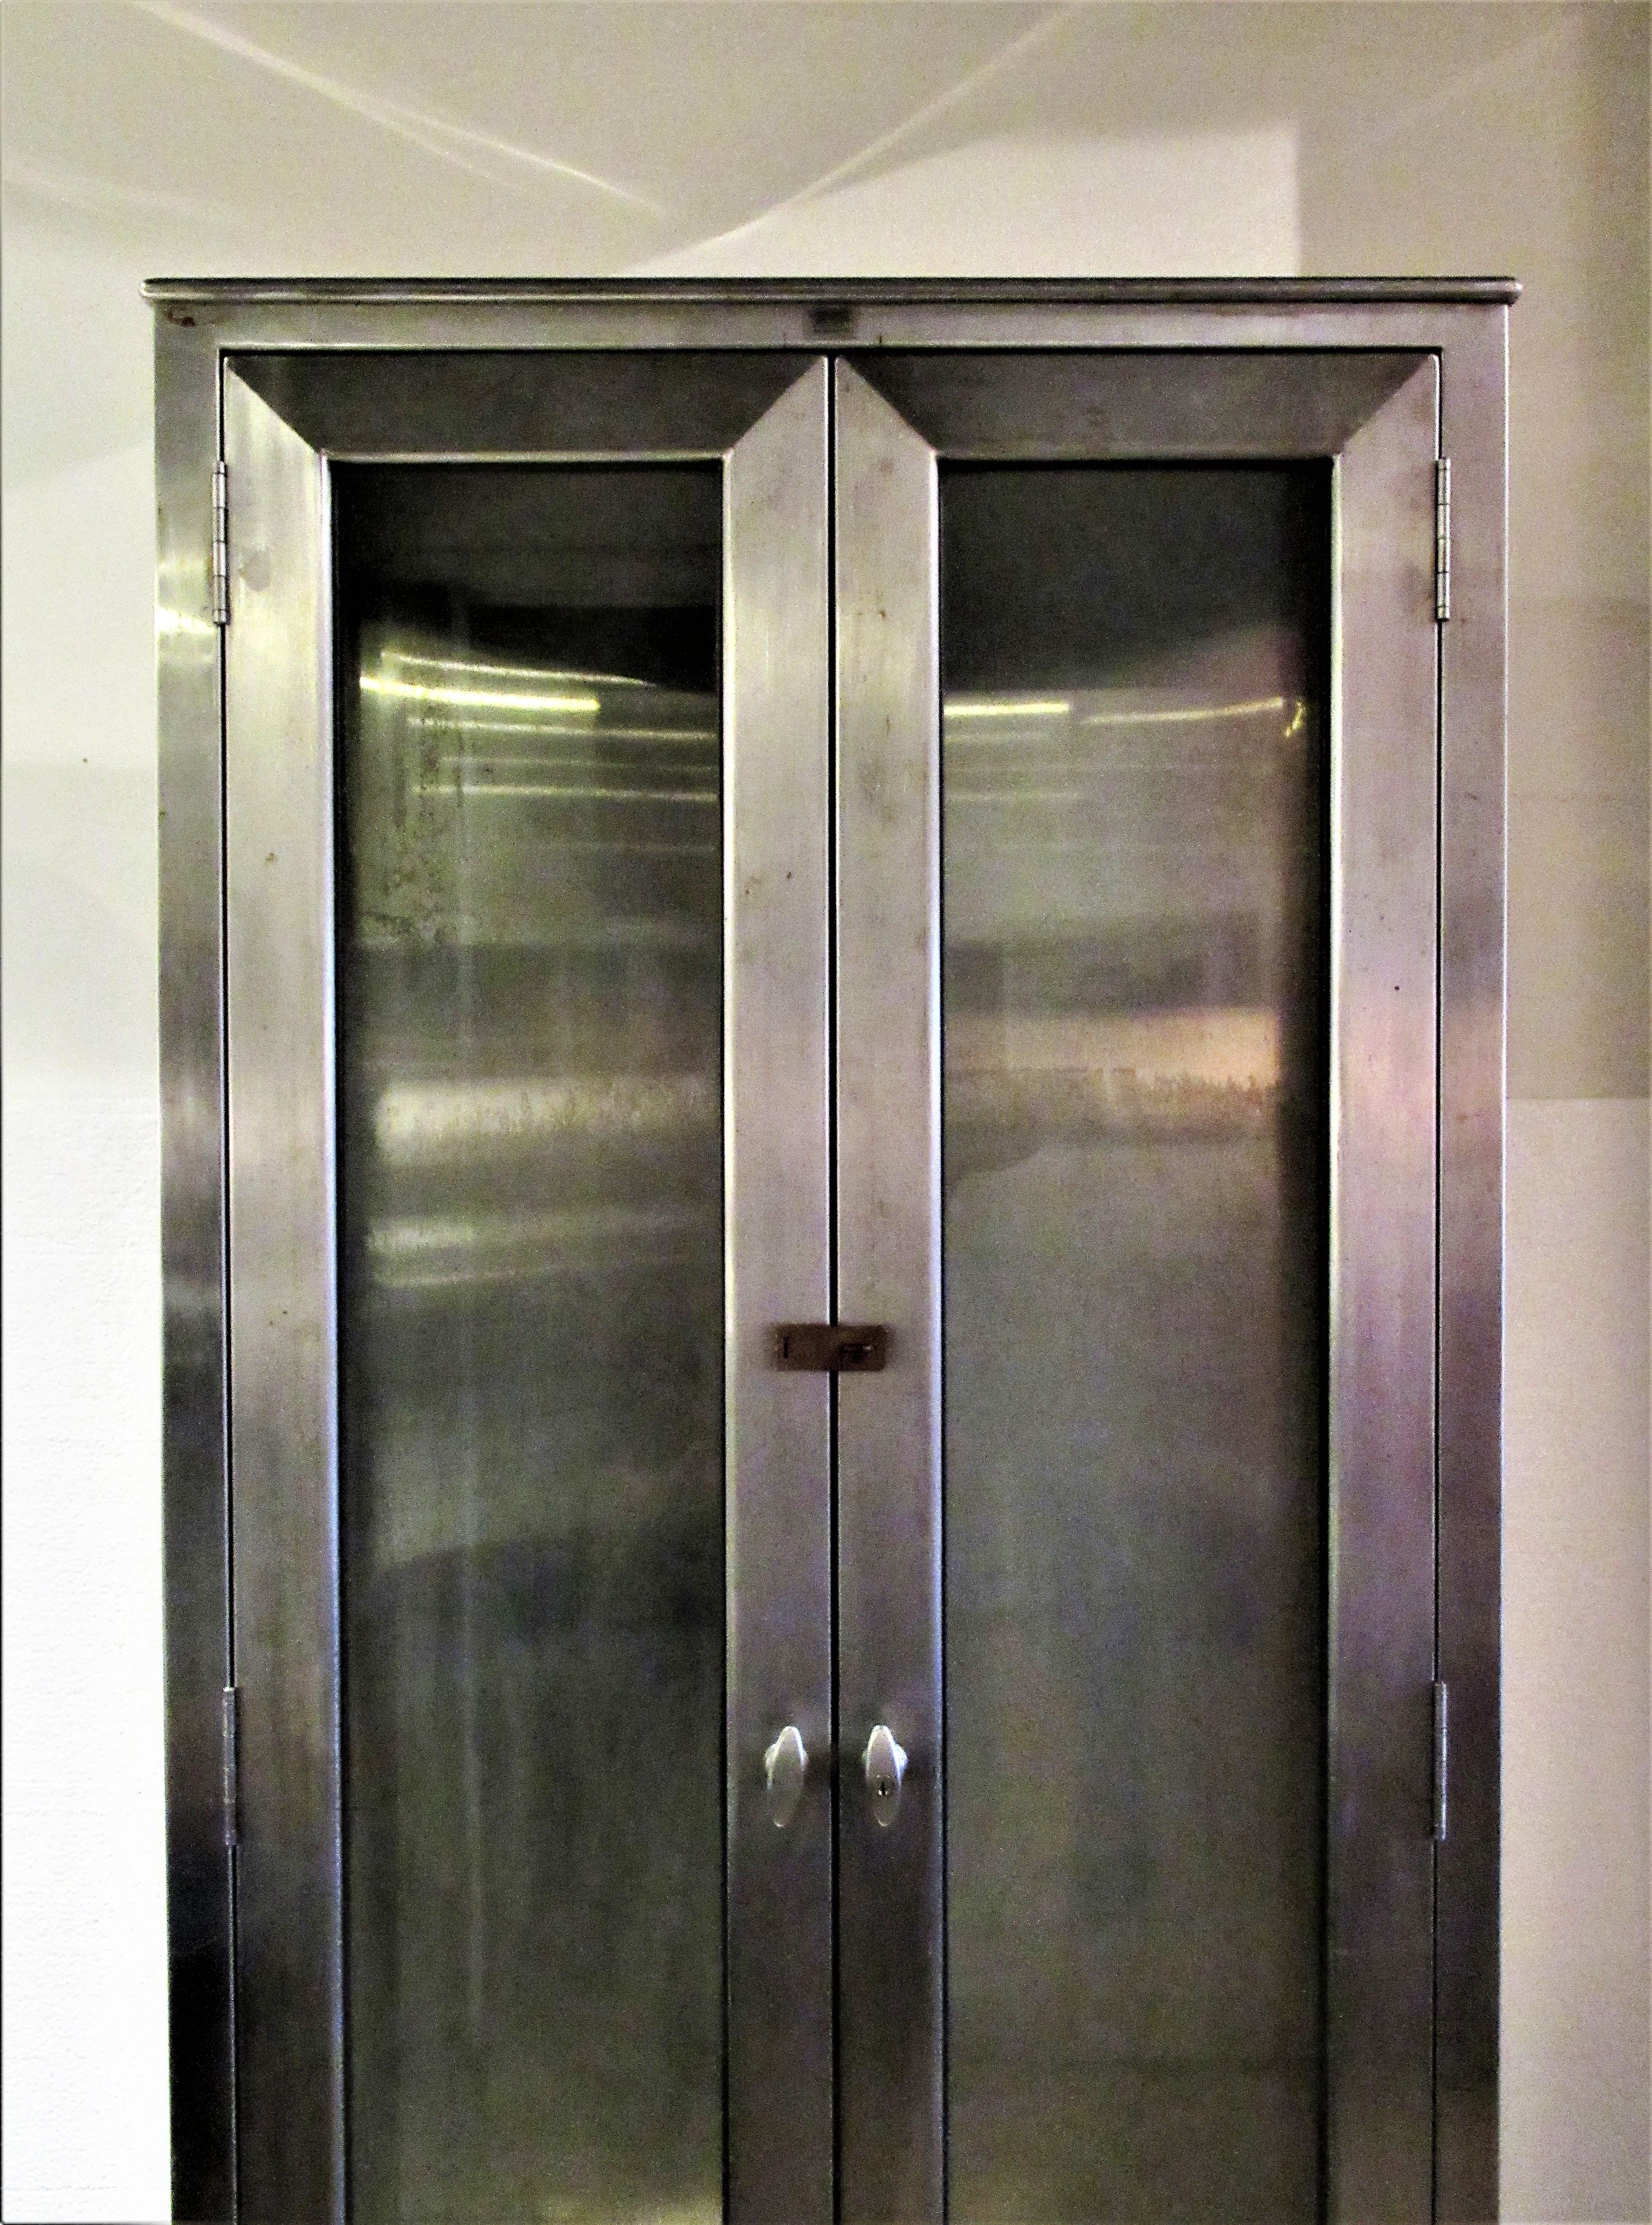 Tall sleek and narrow form stainless steel industrial medical cabinet having two locking glass front doors with panel glass sides and raised on four shaped angled legs, circa 1940s. Exceptional quality. This one's a beauty. See all pictures and read